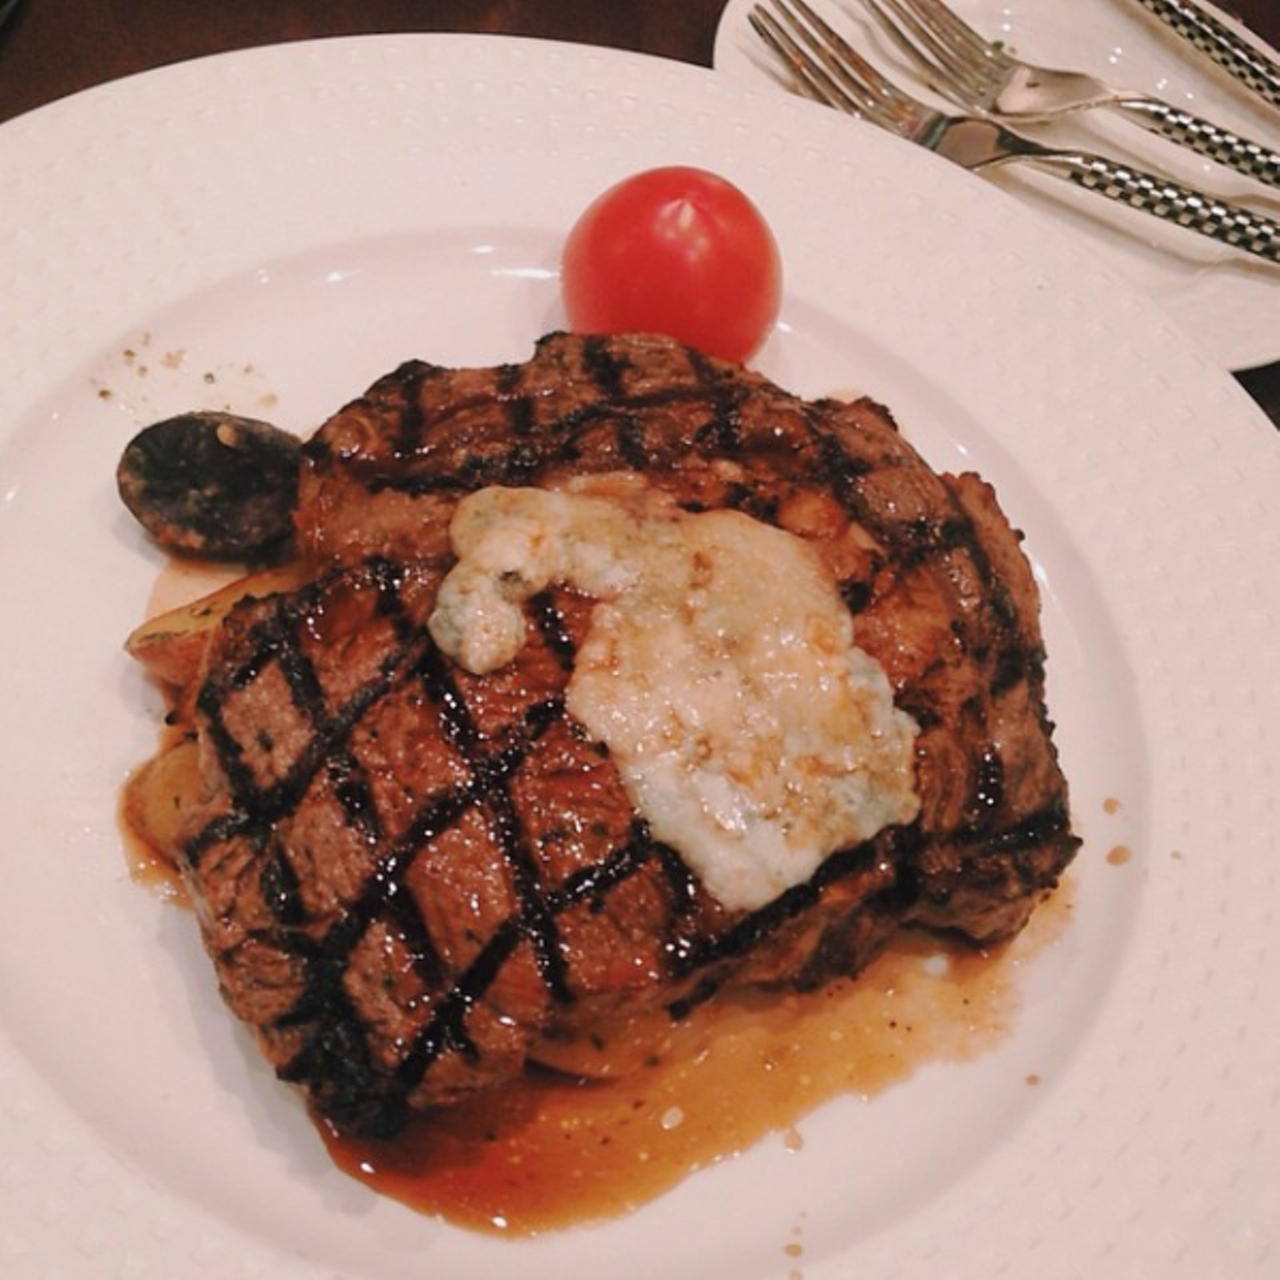  Grilled 12-oz. Tuscan Ribeye at Cala Bella
Steak is usually a good option if you&#146;re looking to get your money&#146;s worth, and this Tuscan ribeye is crusted in Gorgonzola cheese and herbs.
9939 Universal Blvd., 407-996-3663
Photo via kristineyoungin/Instagram